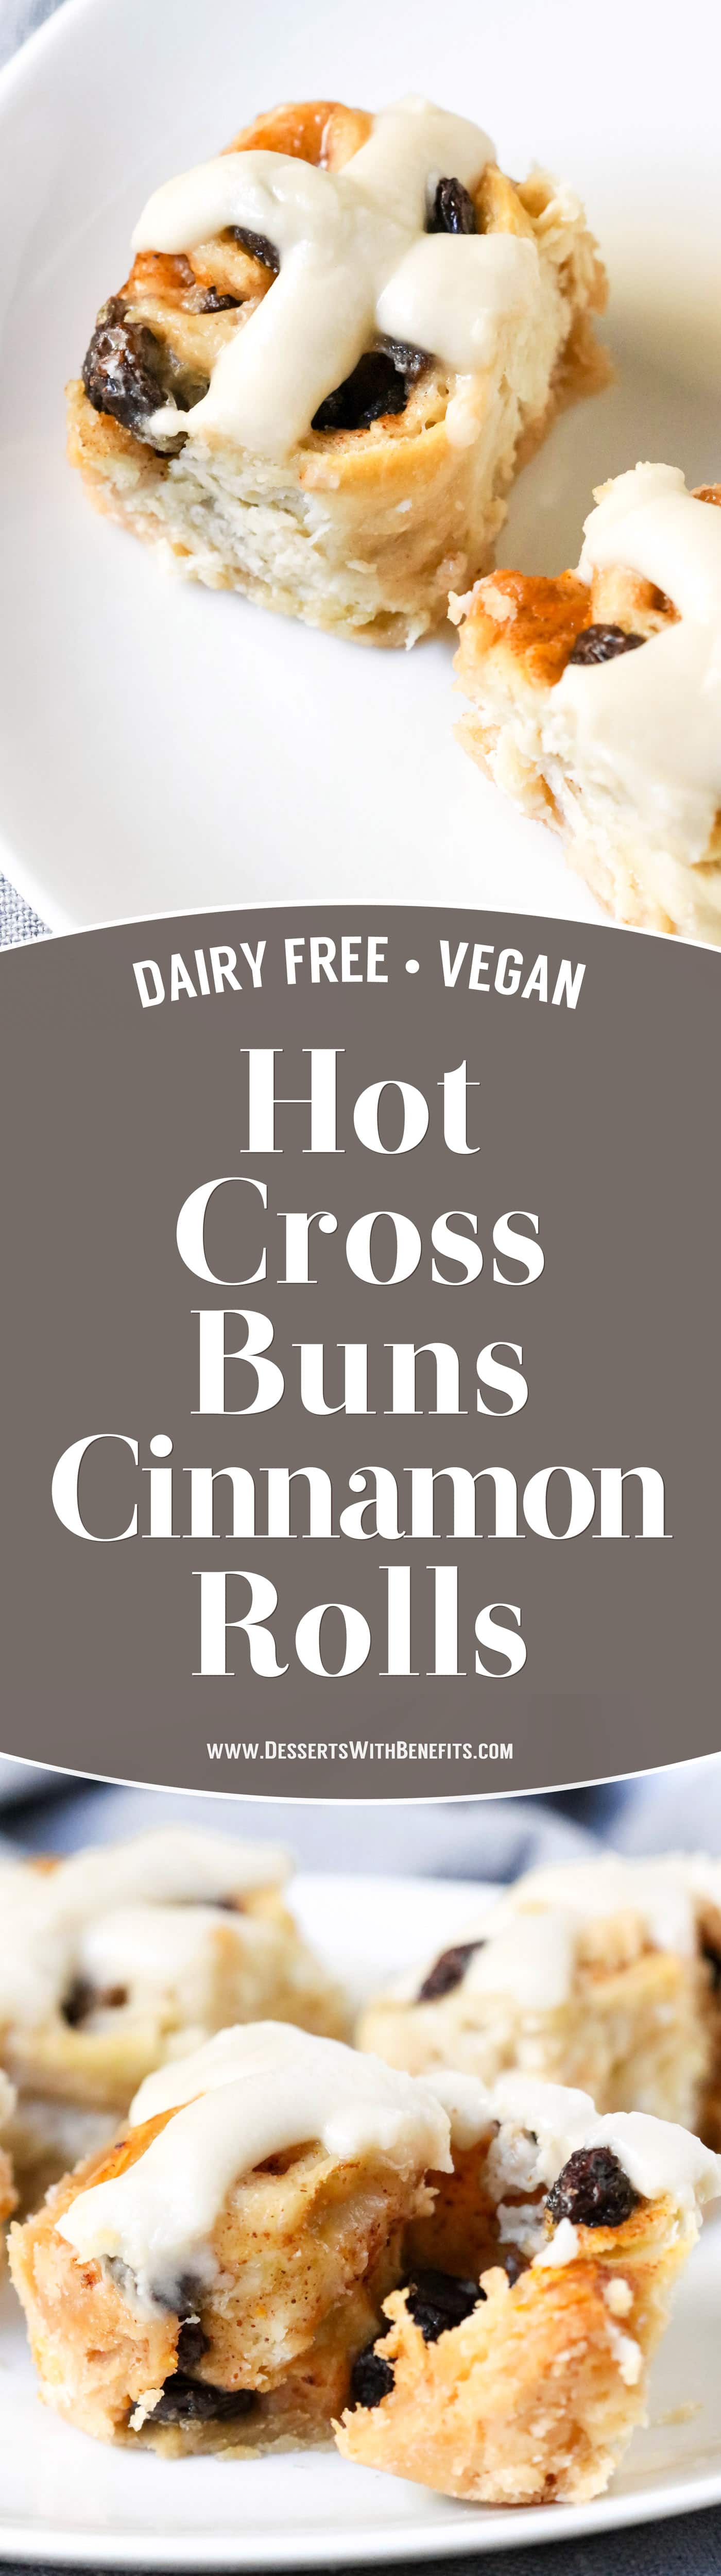 These Hot Cross Buns Cinnamon Rolls are like traditional Hot Cross Buns but BETTER! They're fluffy, sweeter than the original, and spiced with cinnamon and nutmeg. One bite and you'll have a hard time believing they're dairy free and vegan with no sugar added.